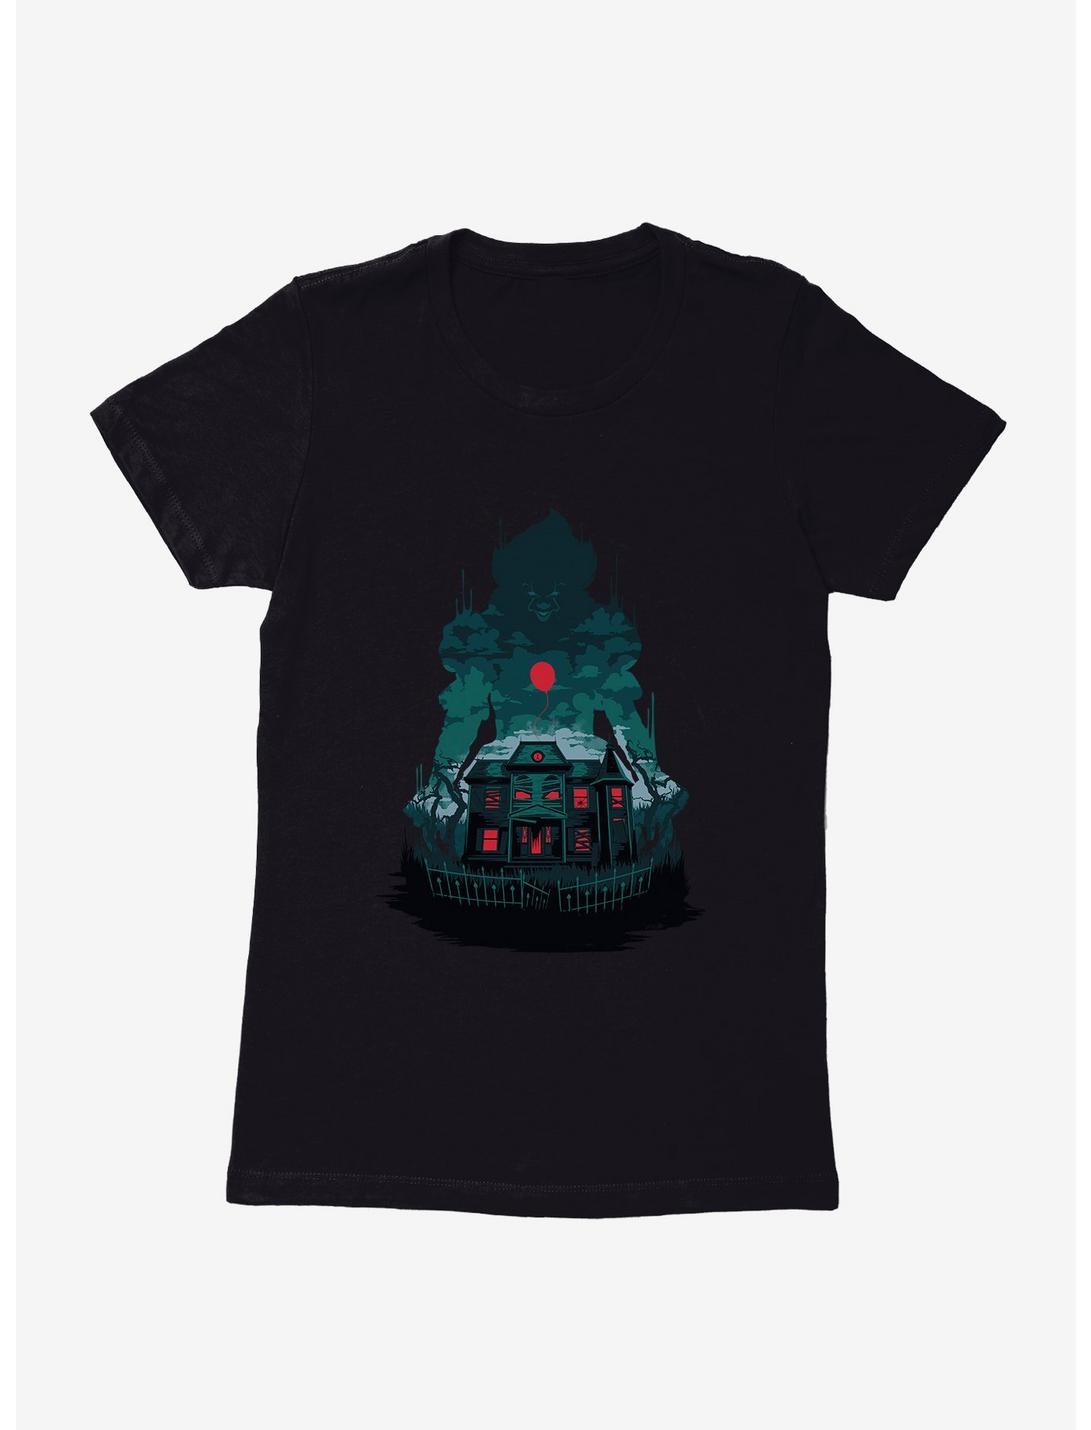 IT Chapter Two Haunted House Womens T-Shirt, BLACK, hi-res